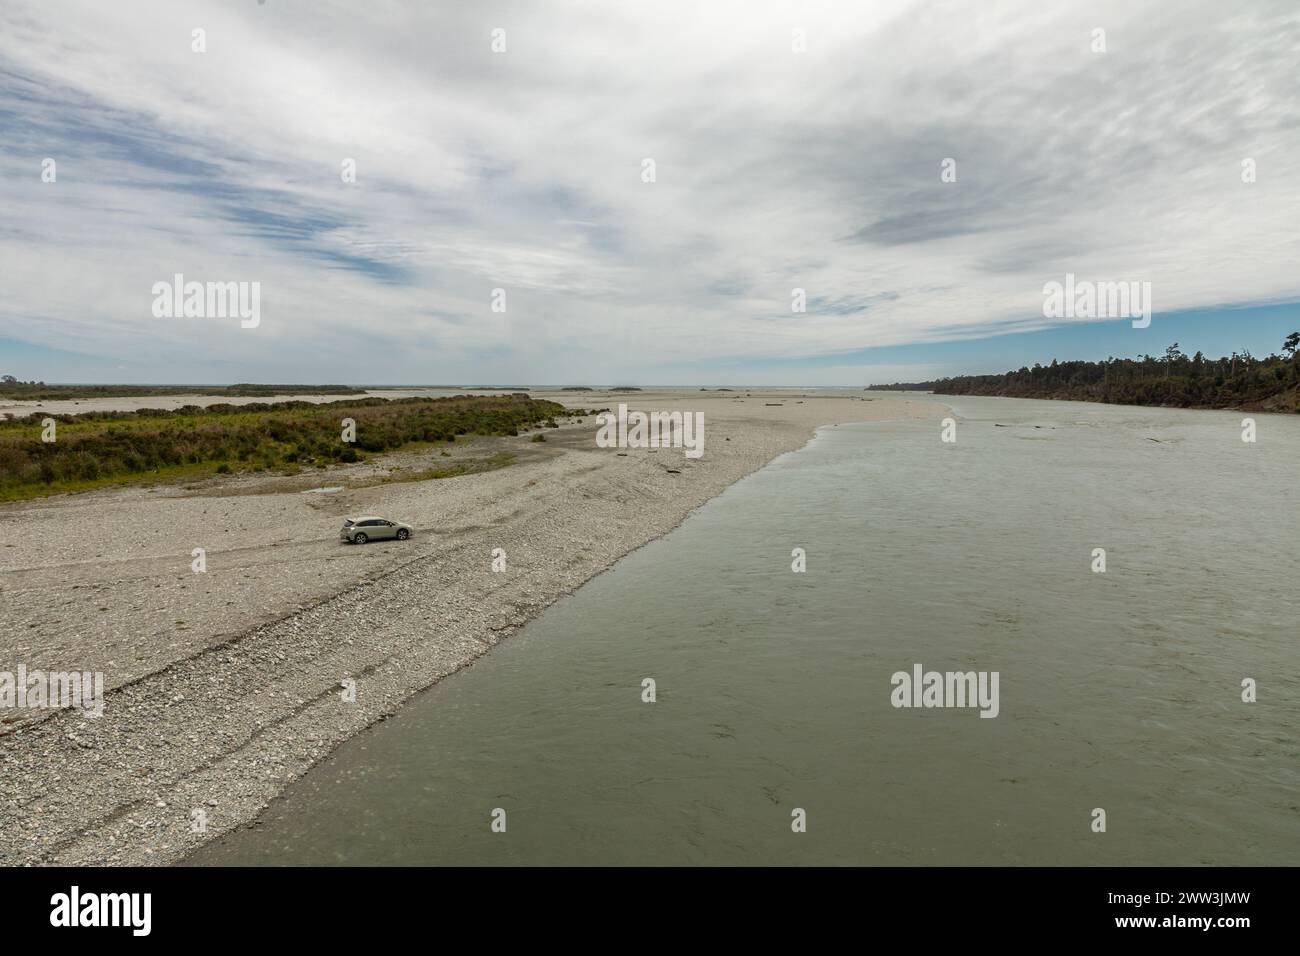 The mouth of the Haast river, with the Tasman Sea in the distance, in the Westland district of the South Island of New Zealand. Stock Photo